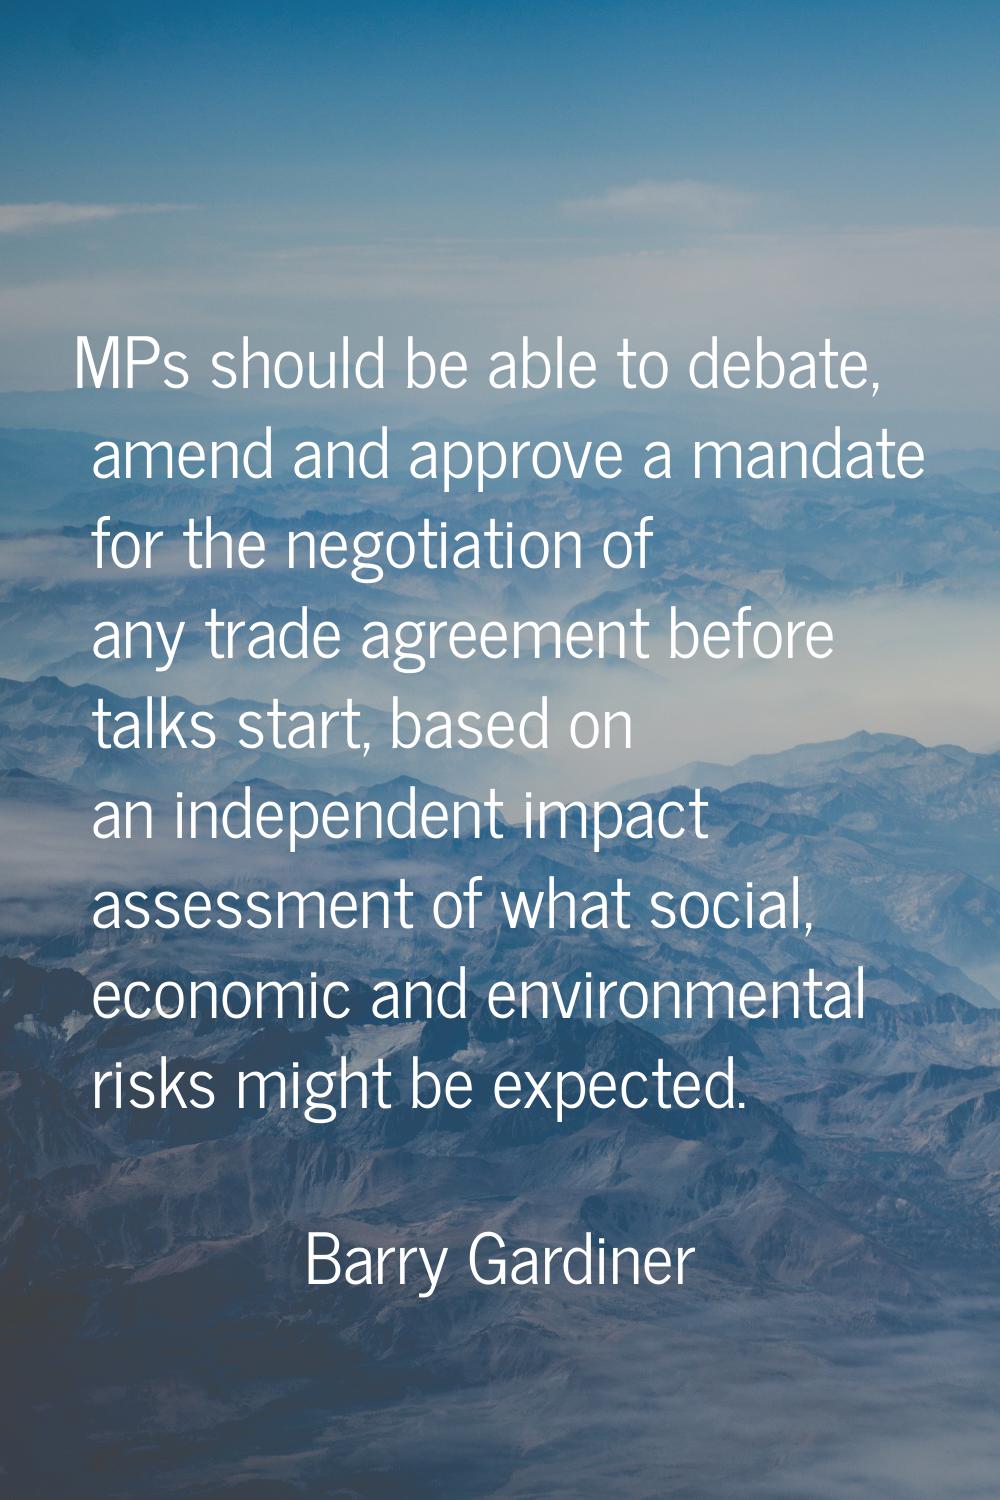 MPs should be able to debate, amend and approve a mandate for the negotiation of any trade agreemen